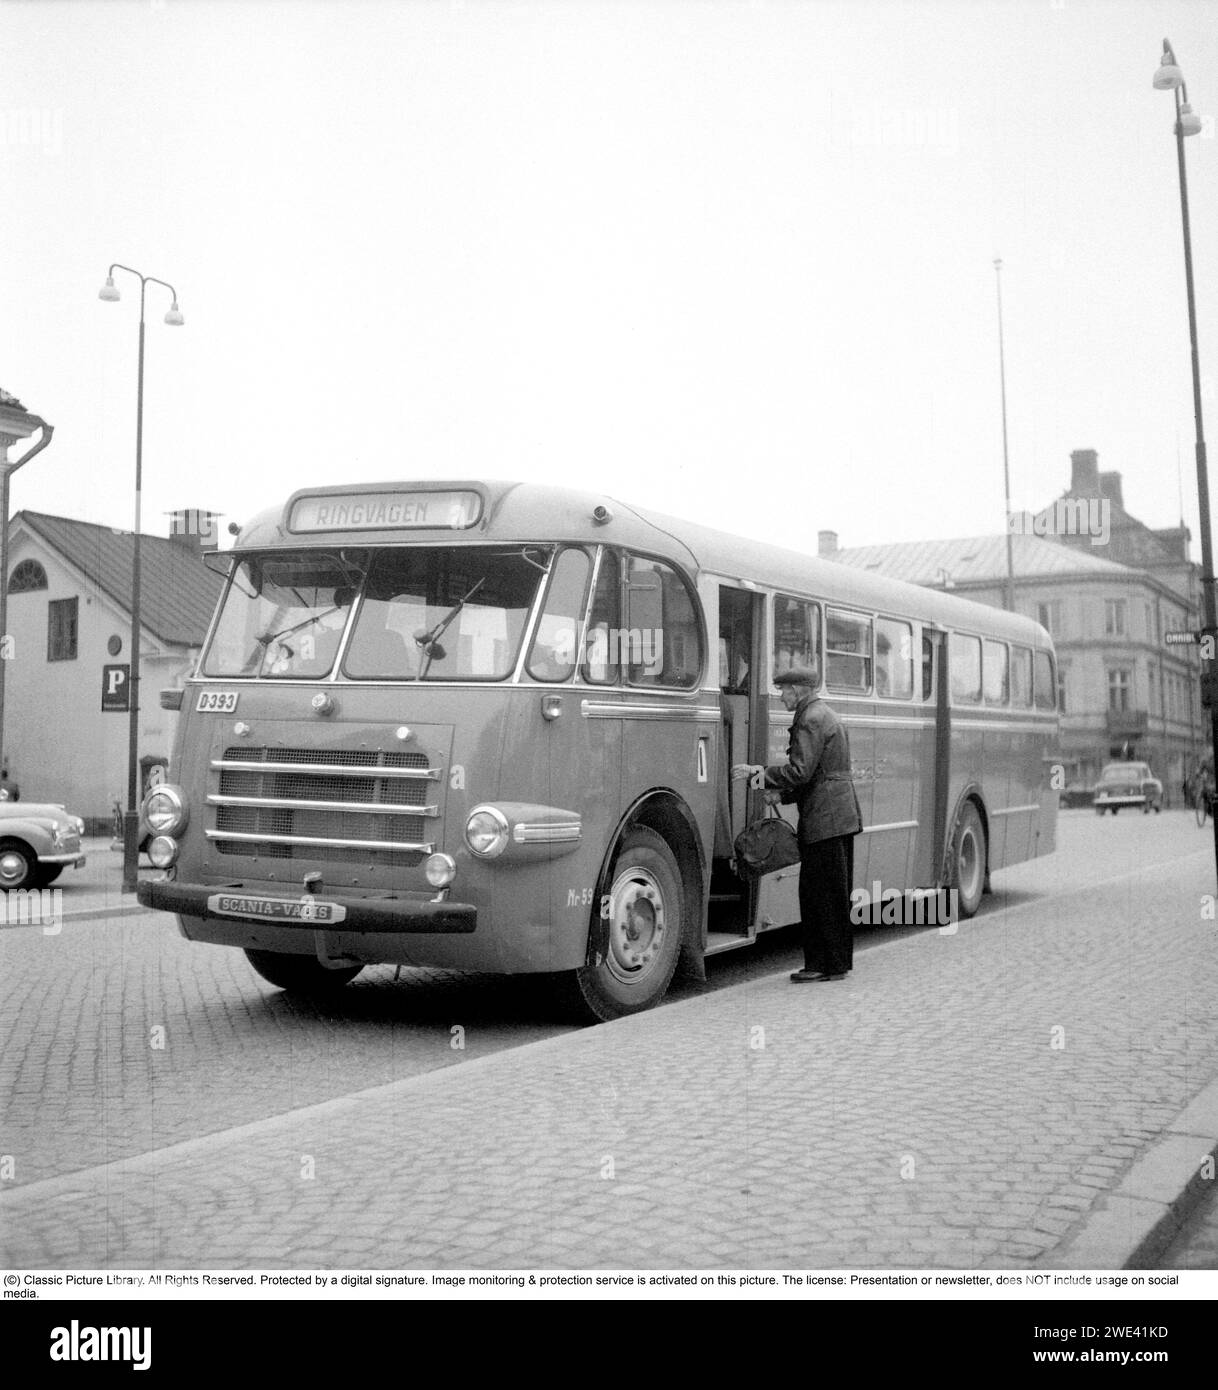 In the 1950s. A Scania Vabis bus stopped to pick up a passanger waiting in the street. Nyköping Sweden 1955. Kristoffersson ref BR72-1 Stock Photo